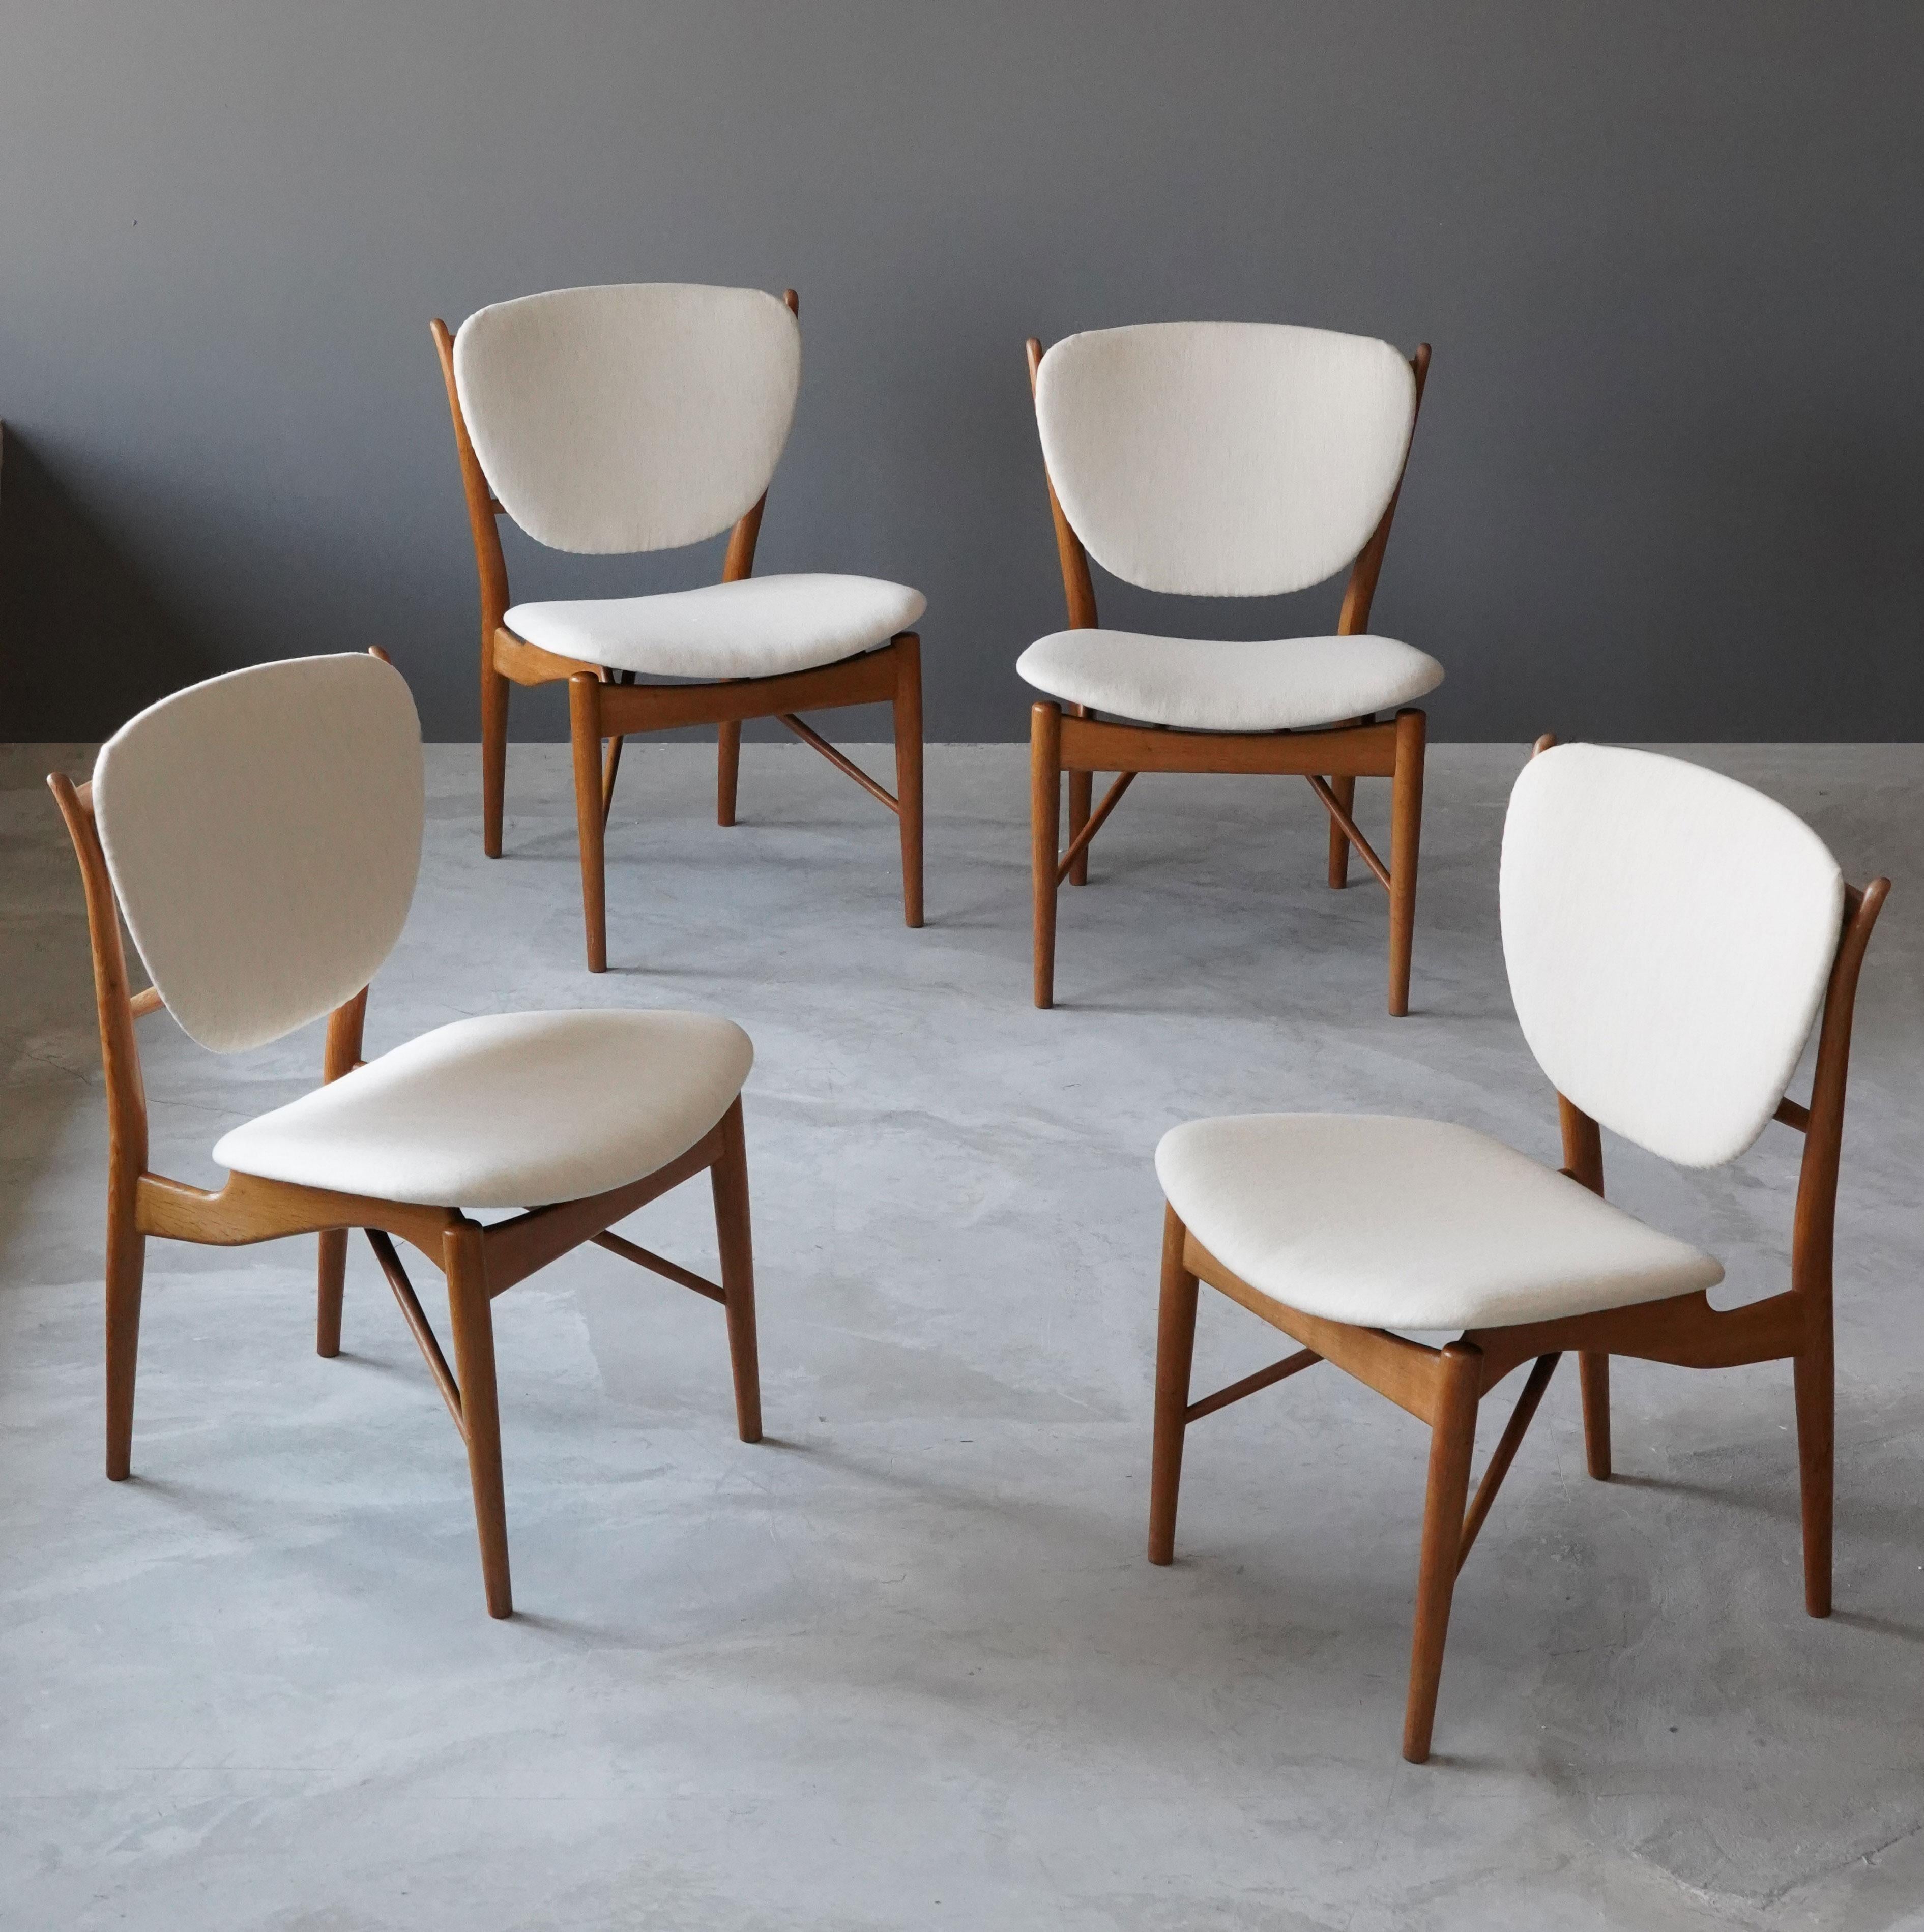 A set of 4 rare dining or side chairs. Designed by Finn Juhl, executed by cabinet maker Niels Vodder, Copenhagen, Denmark, 1950s. In finely and organically sculpted oak. Reupholstered in brand new Scandinavian high-end fabric.

Other designers of